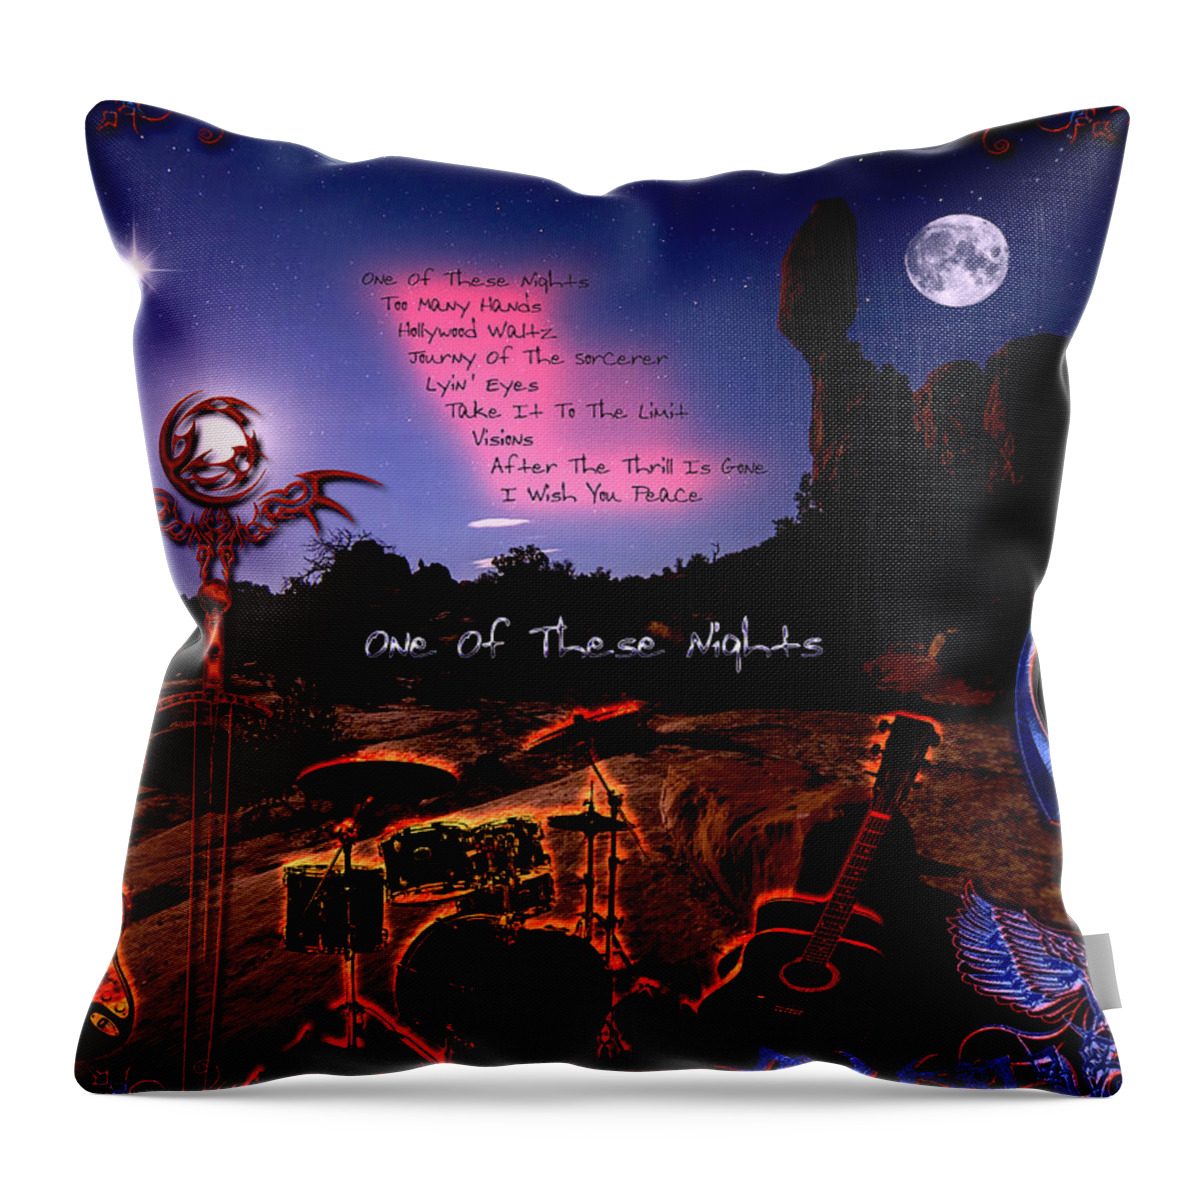 One Of These Nights Throw Pillow featuring the digital art One Of These Nights by Michael Damiani